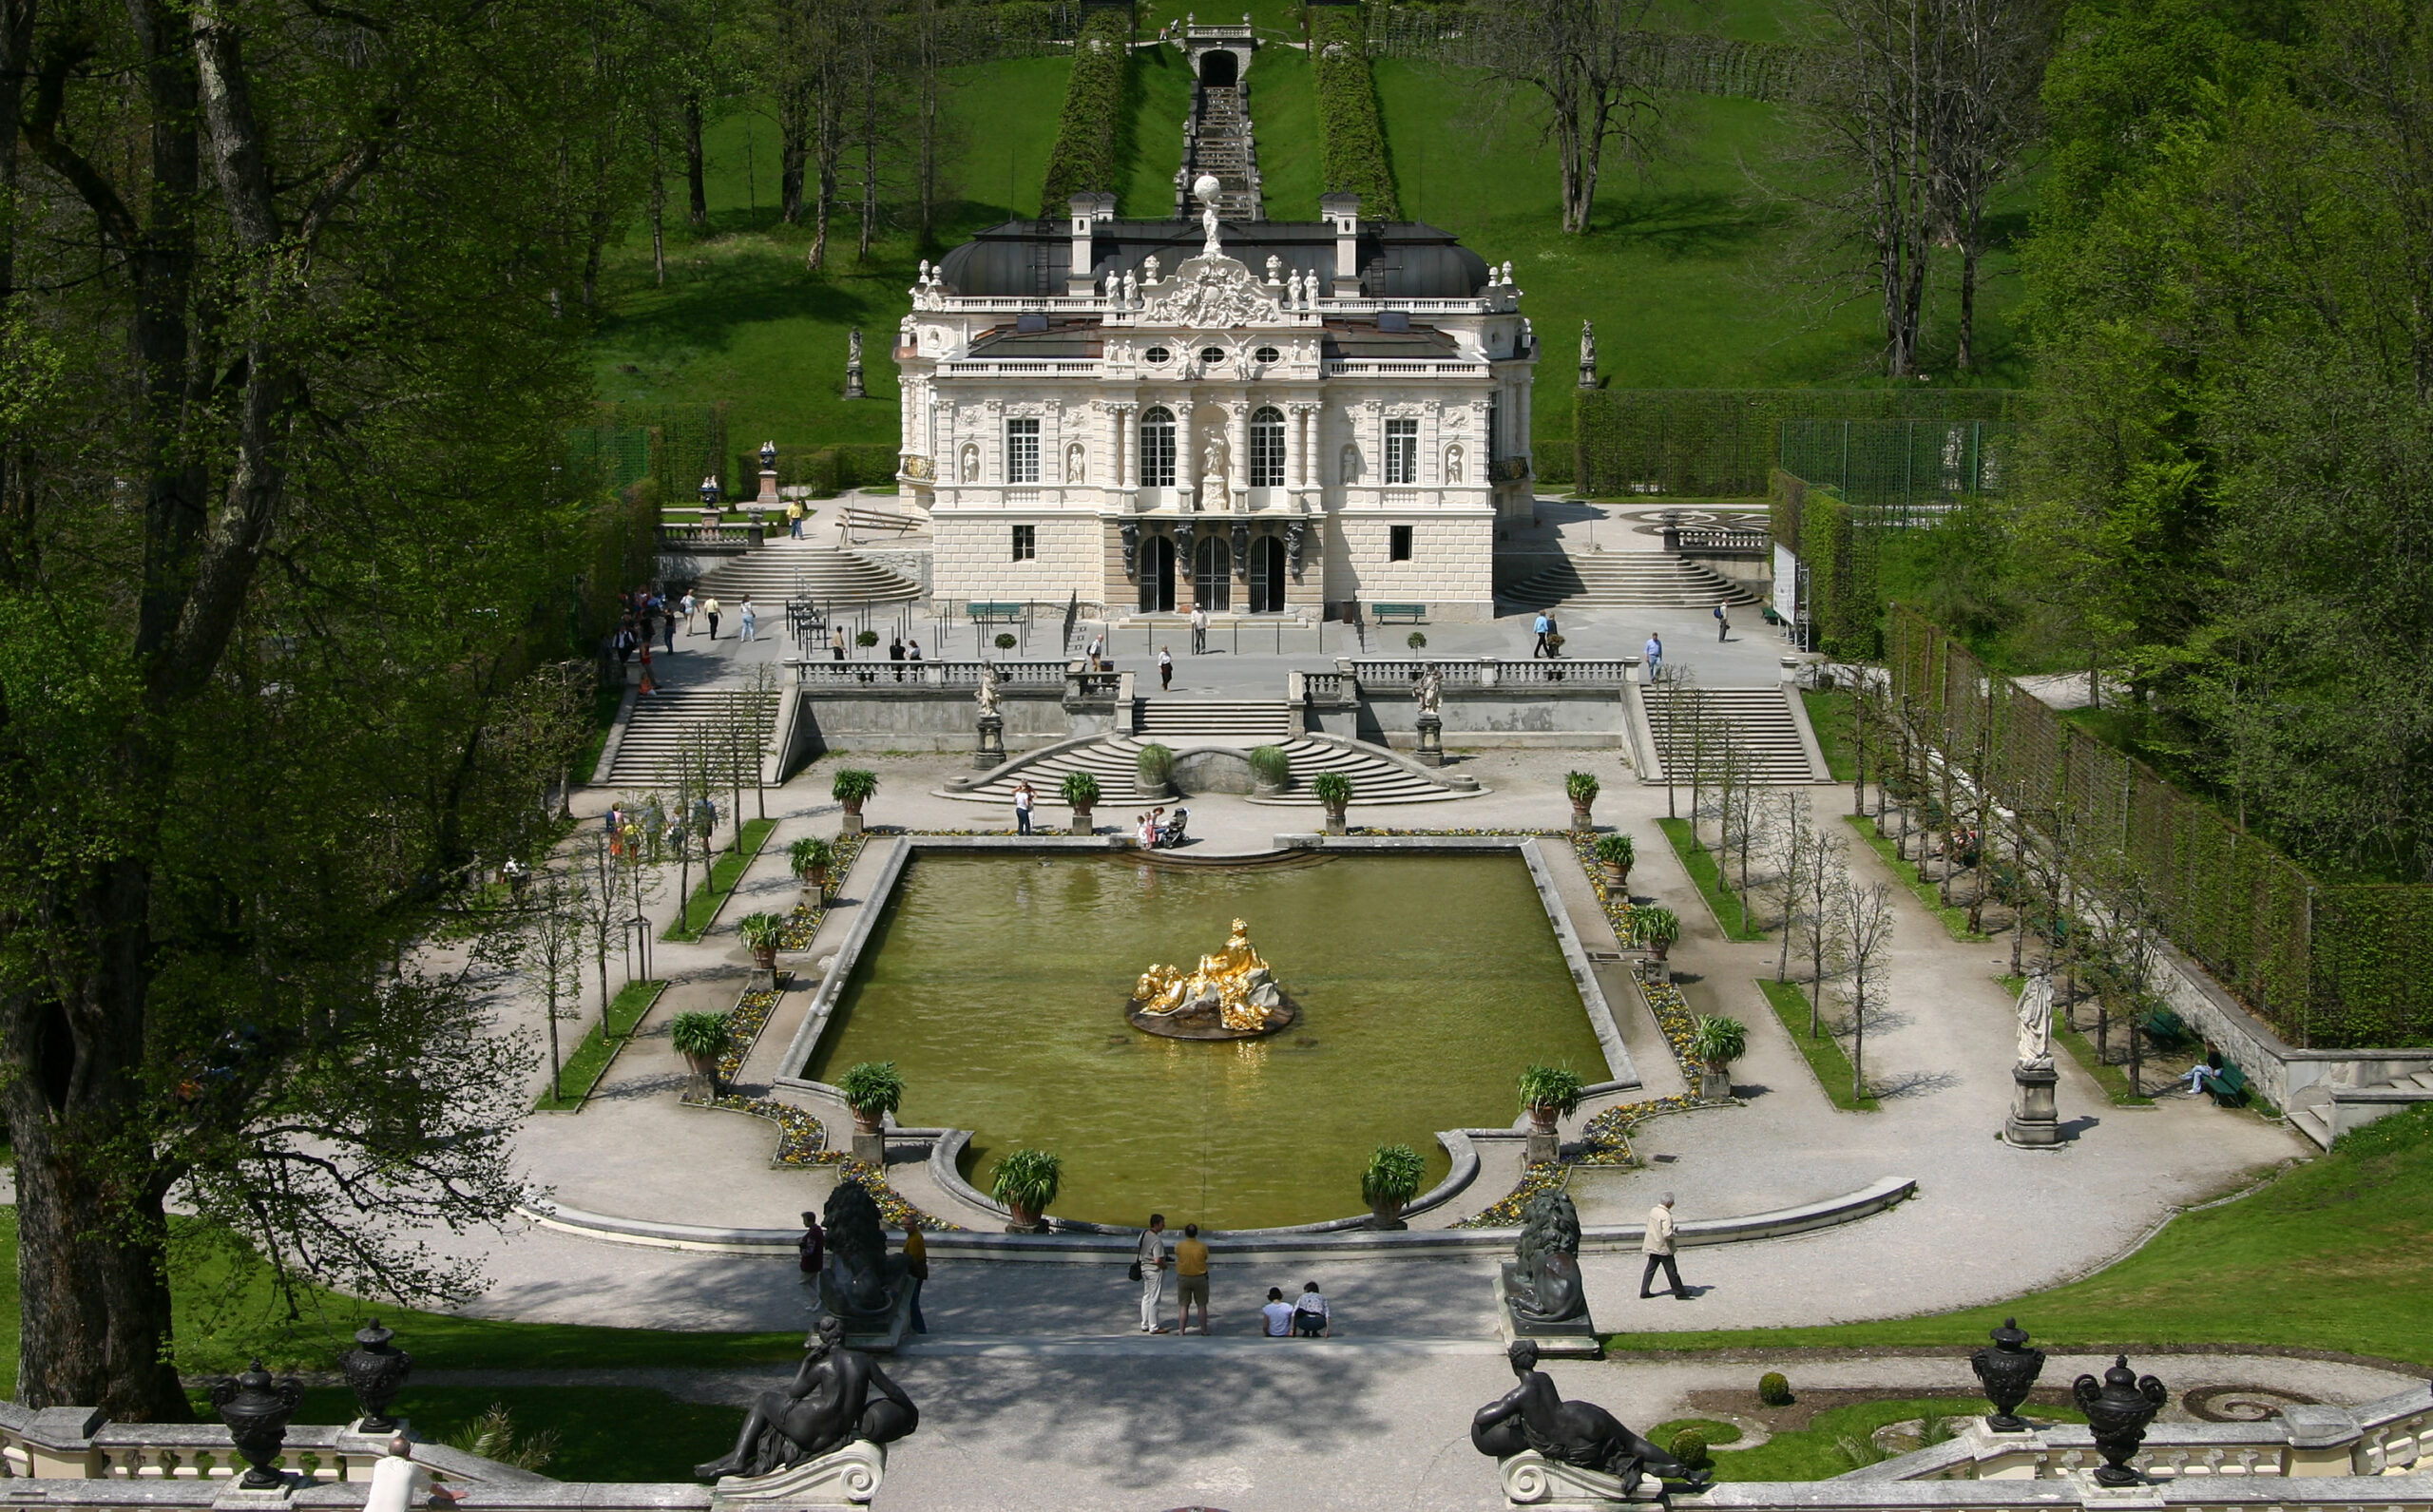 Linderhof Palace nestled in the Bavarian Alps, surrounded by manicured gardens and ornate fountains, reminiscent of Versailles.